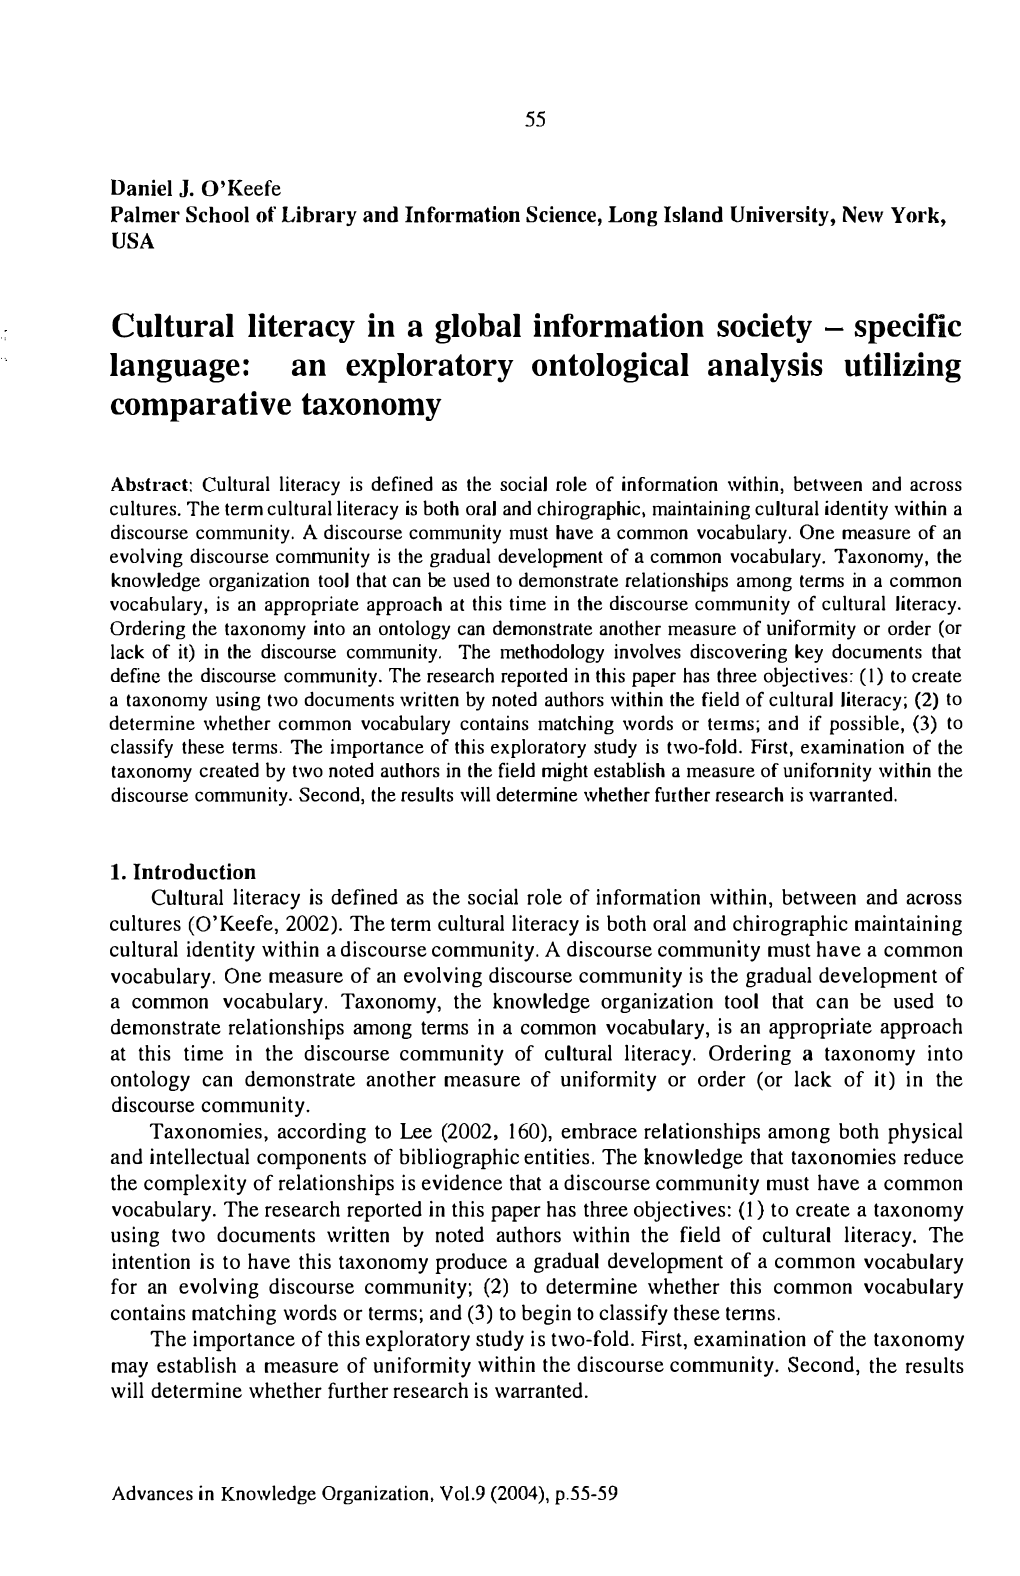 Cultural Literacy in a Global Information Society - Specific Language: an Exploratory Ontological Analysis Utilizing Comparative Taxonomy